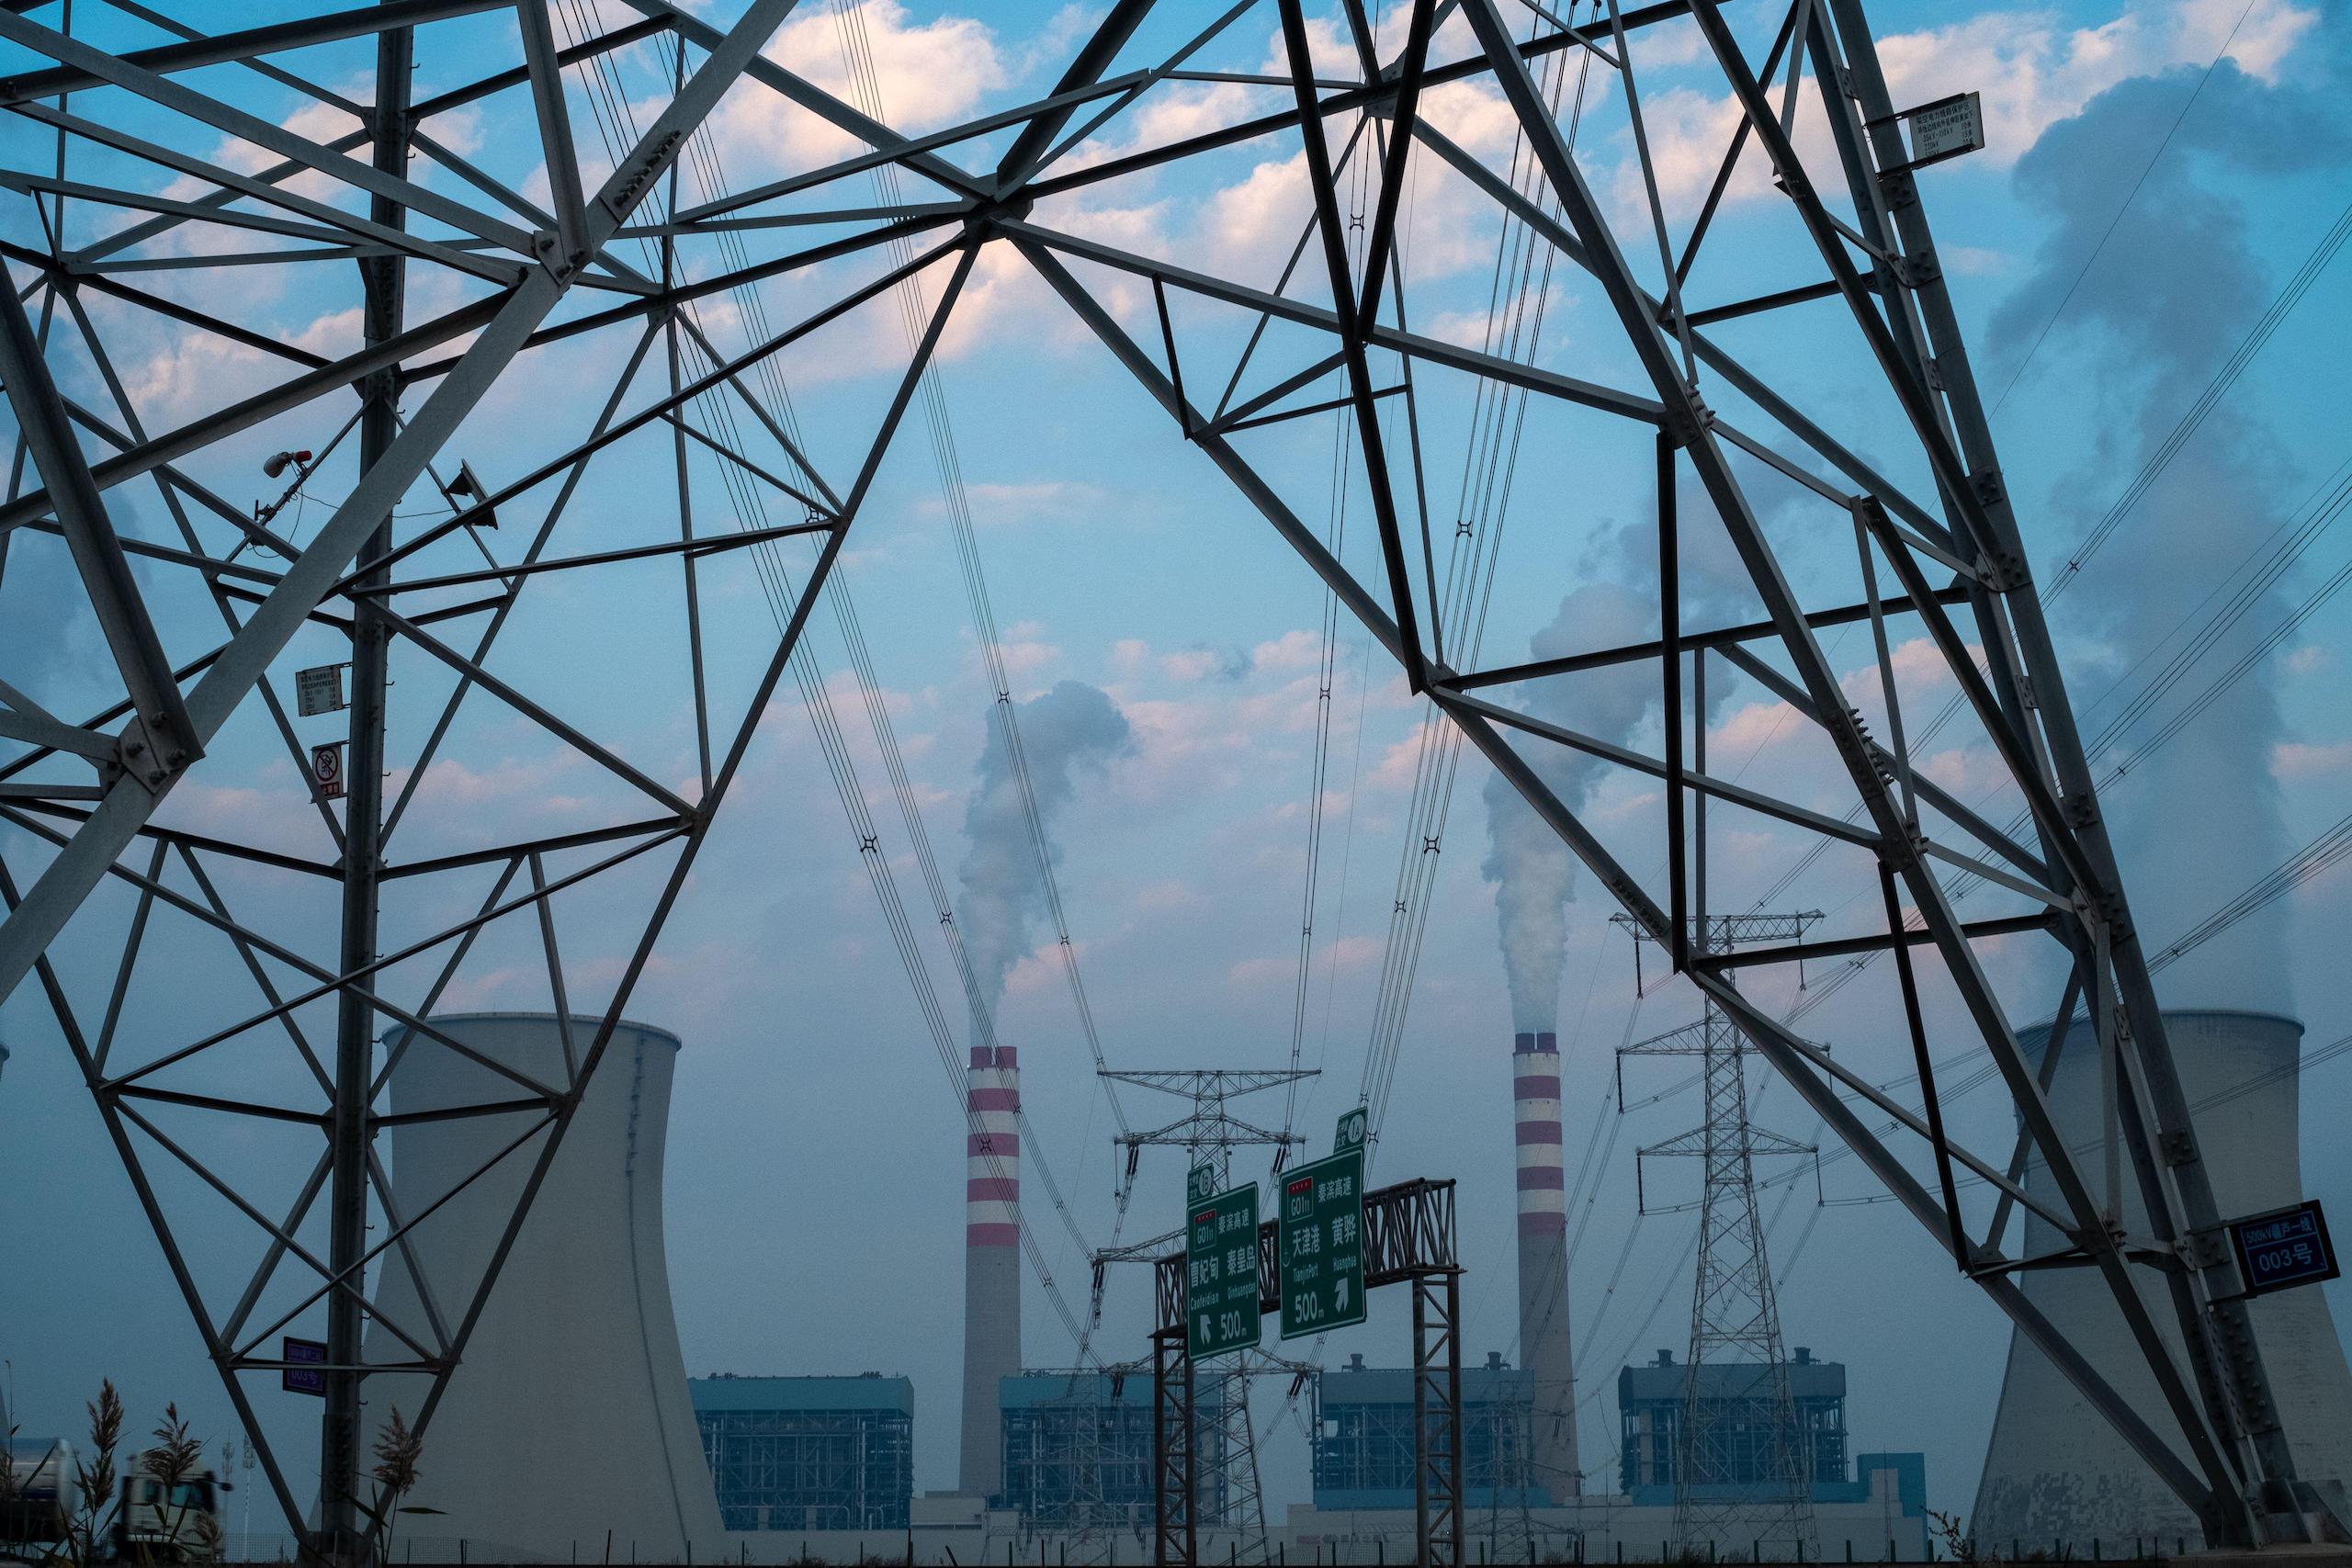 Experts believe a sudden surge in demand for electricity as China's economy reopened was a main cause of recent power outages (Image: Lou-Foto/Alamy)